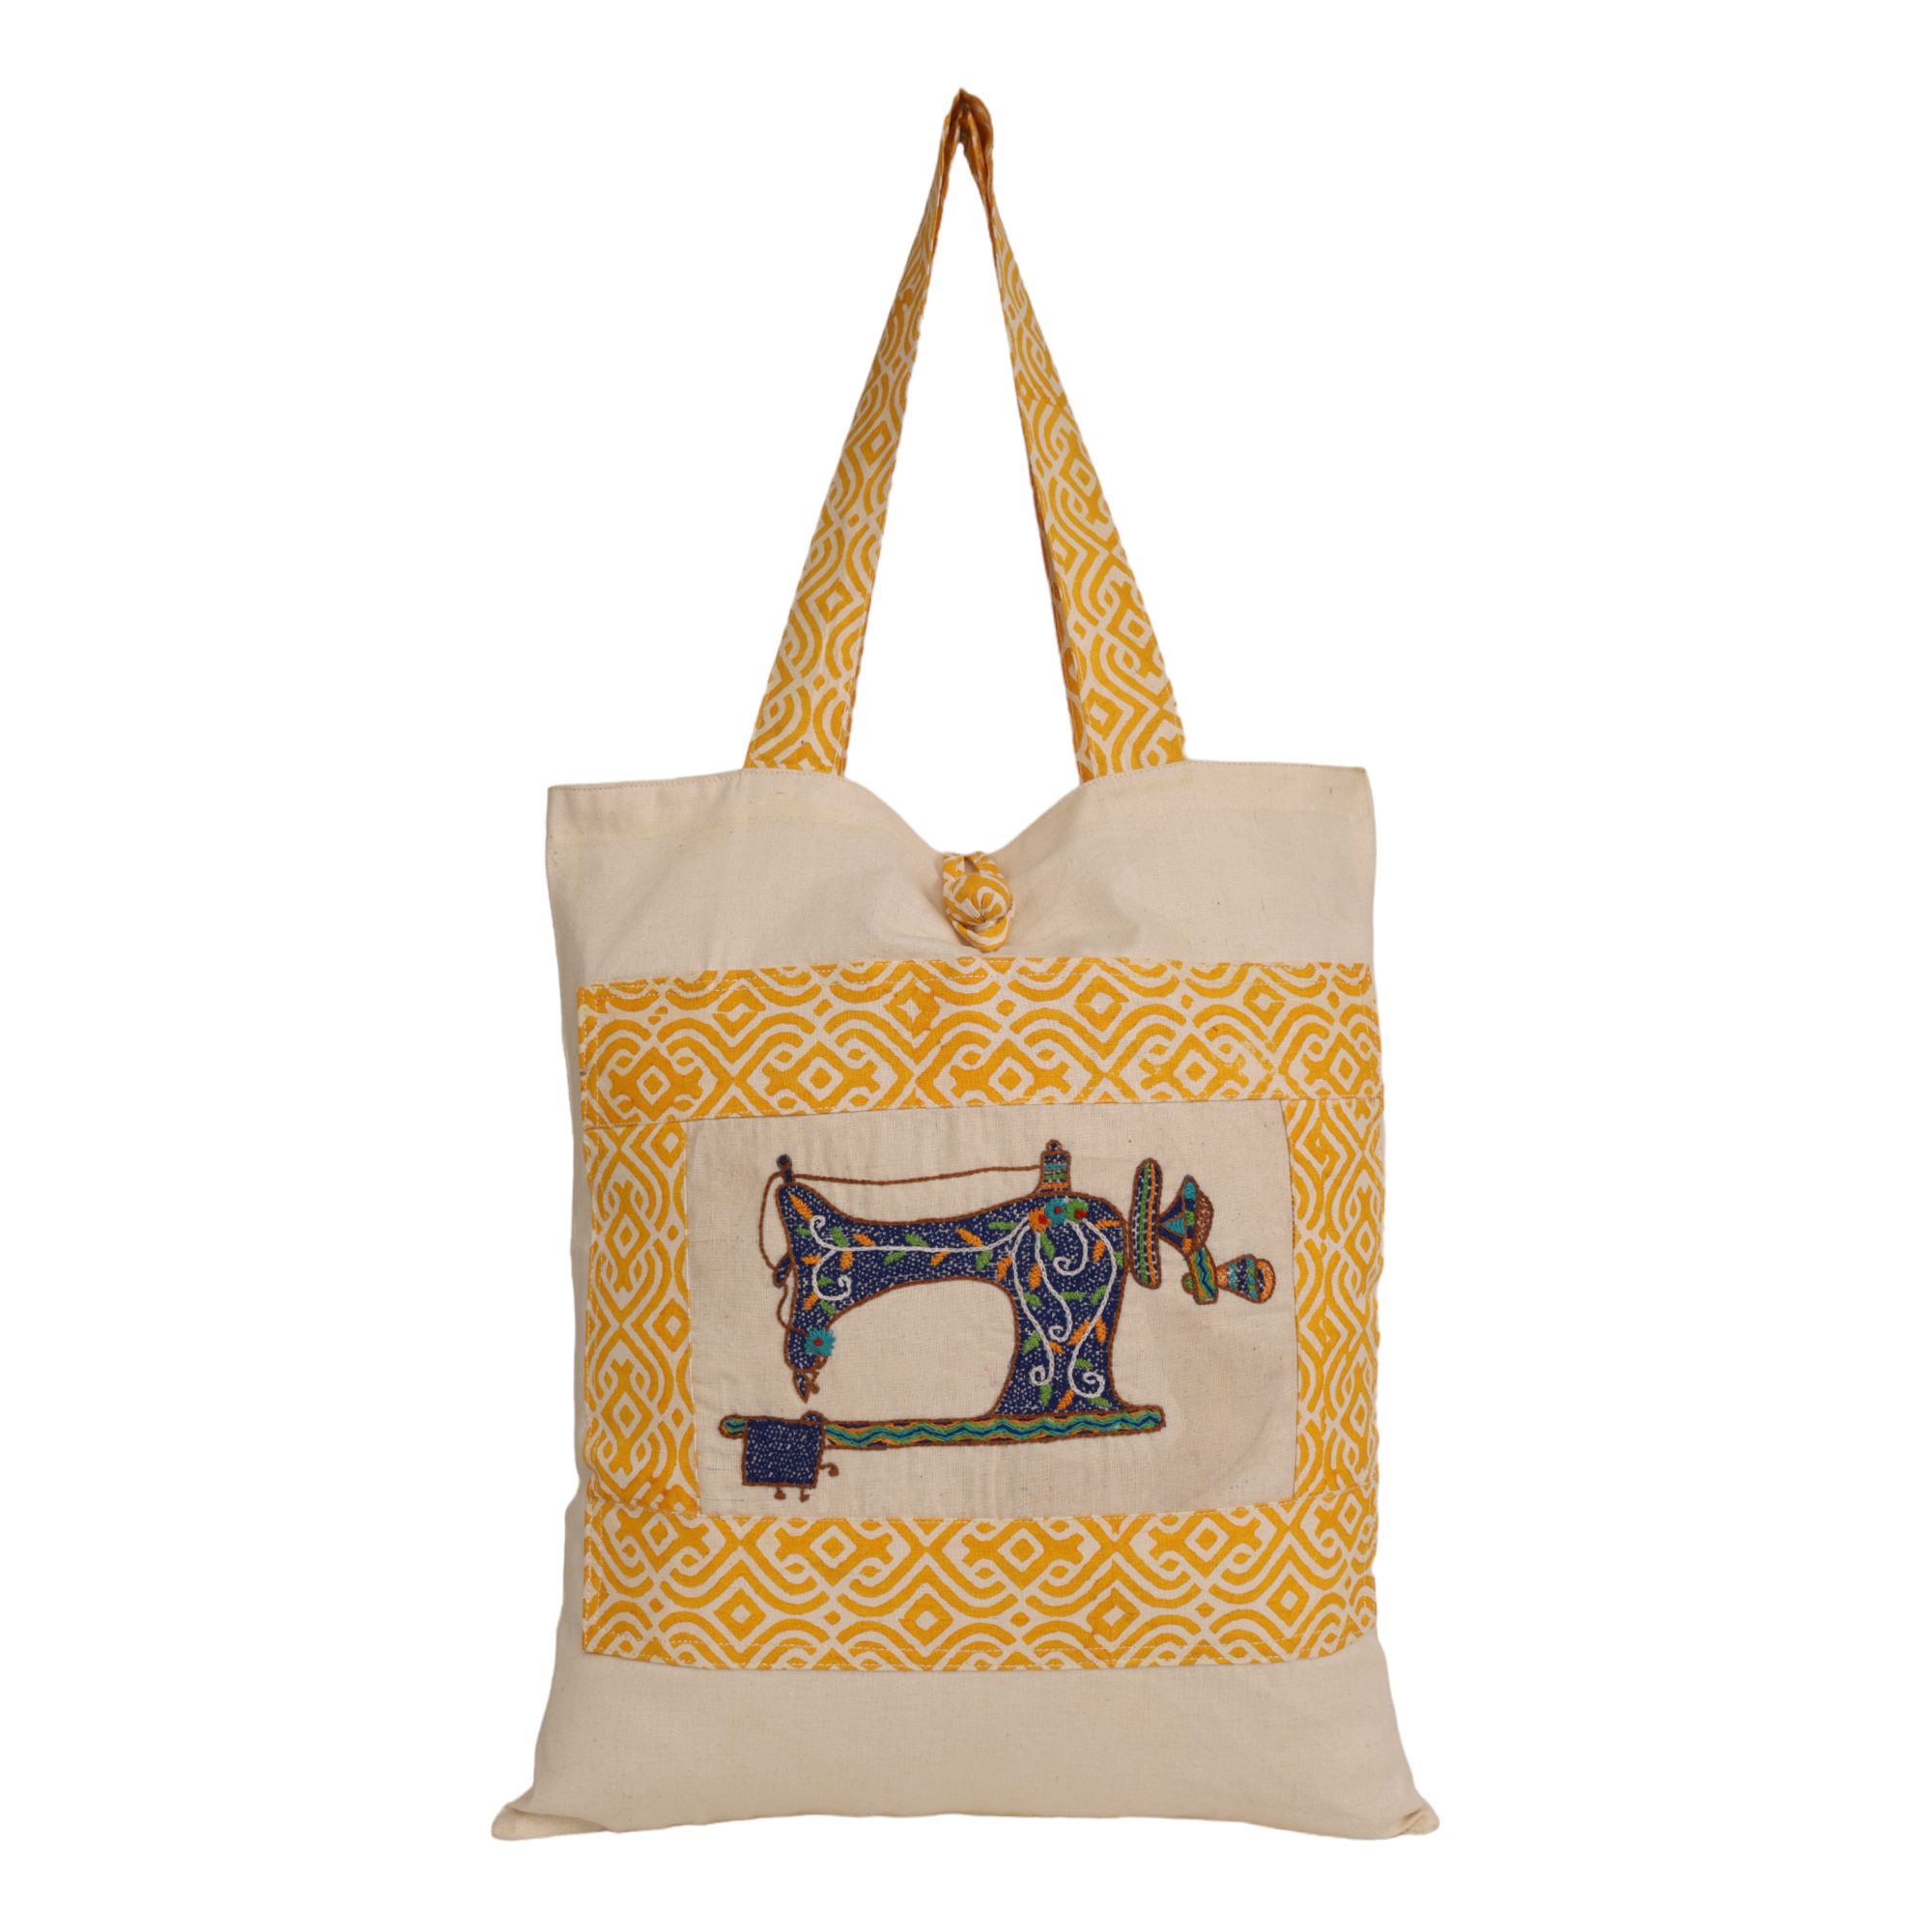 Shop INDHA Cotton Tote Bag Stitchmate Embroidery